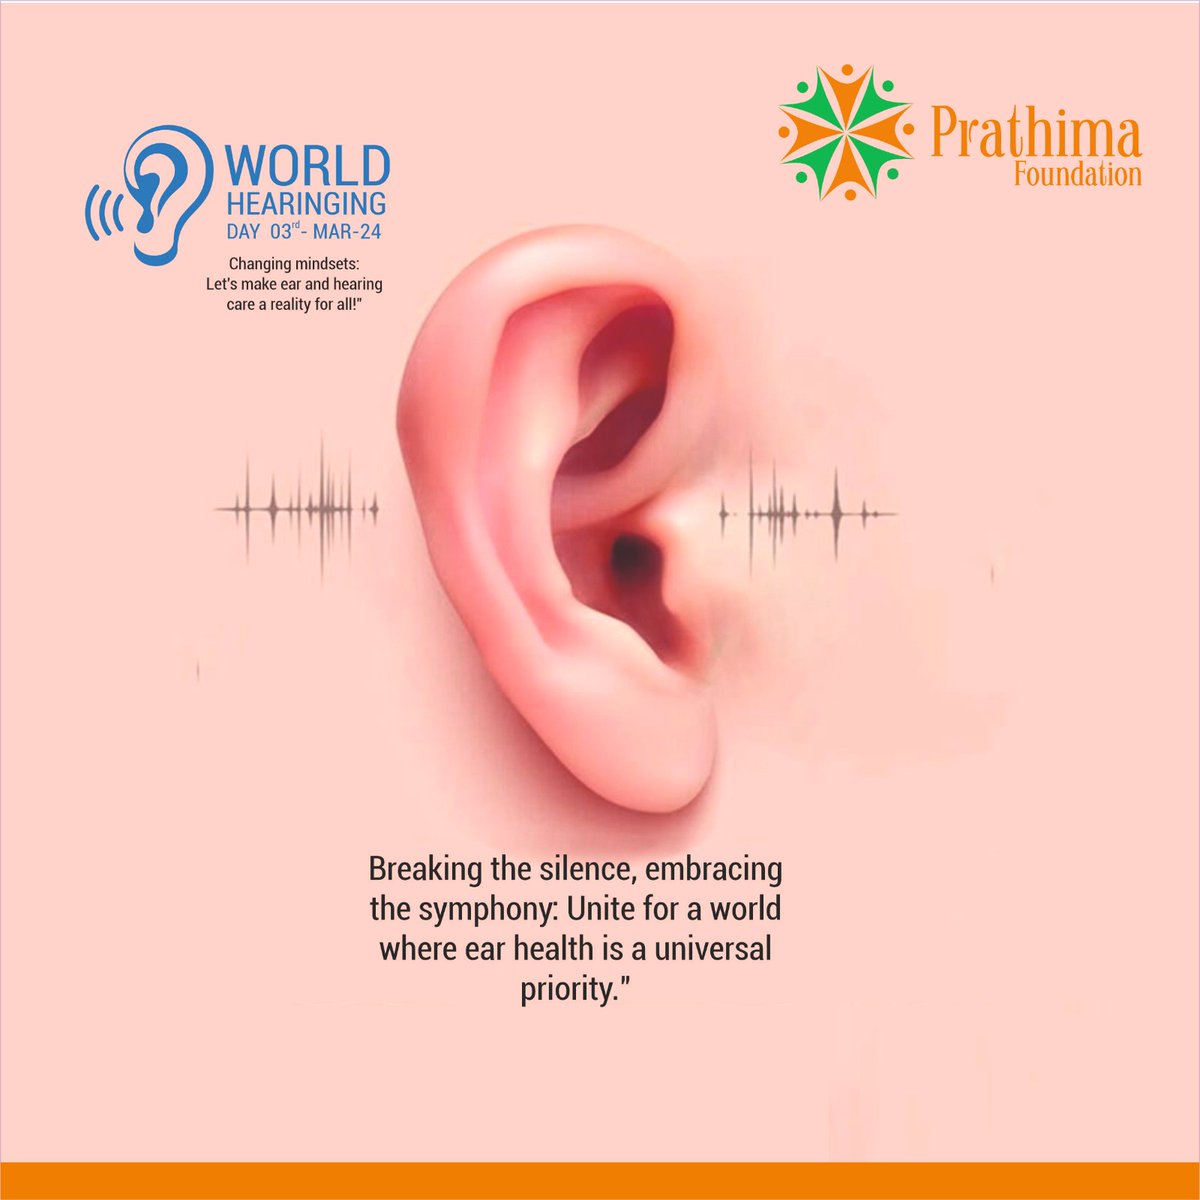 𝐖𝐨𝐫𝐥𝐝 𝐇𝐞𝐚𝐫𝐢𝐧𝐠 𝐃𝐚𝐲
Breaking the silence, embracing the symphony: Unite for a world where ear health is a universal priority.

#Worldhearingday #hearingday2023 #hearingday #ear #hearing #specialdaycreative #earcare #hearingawareness #entdoctor #prathimafoundation #PF